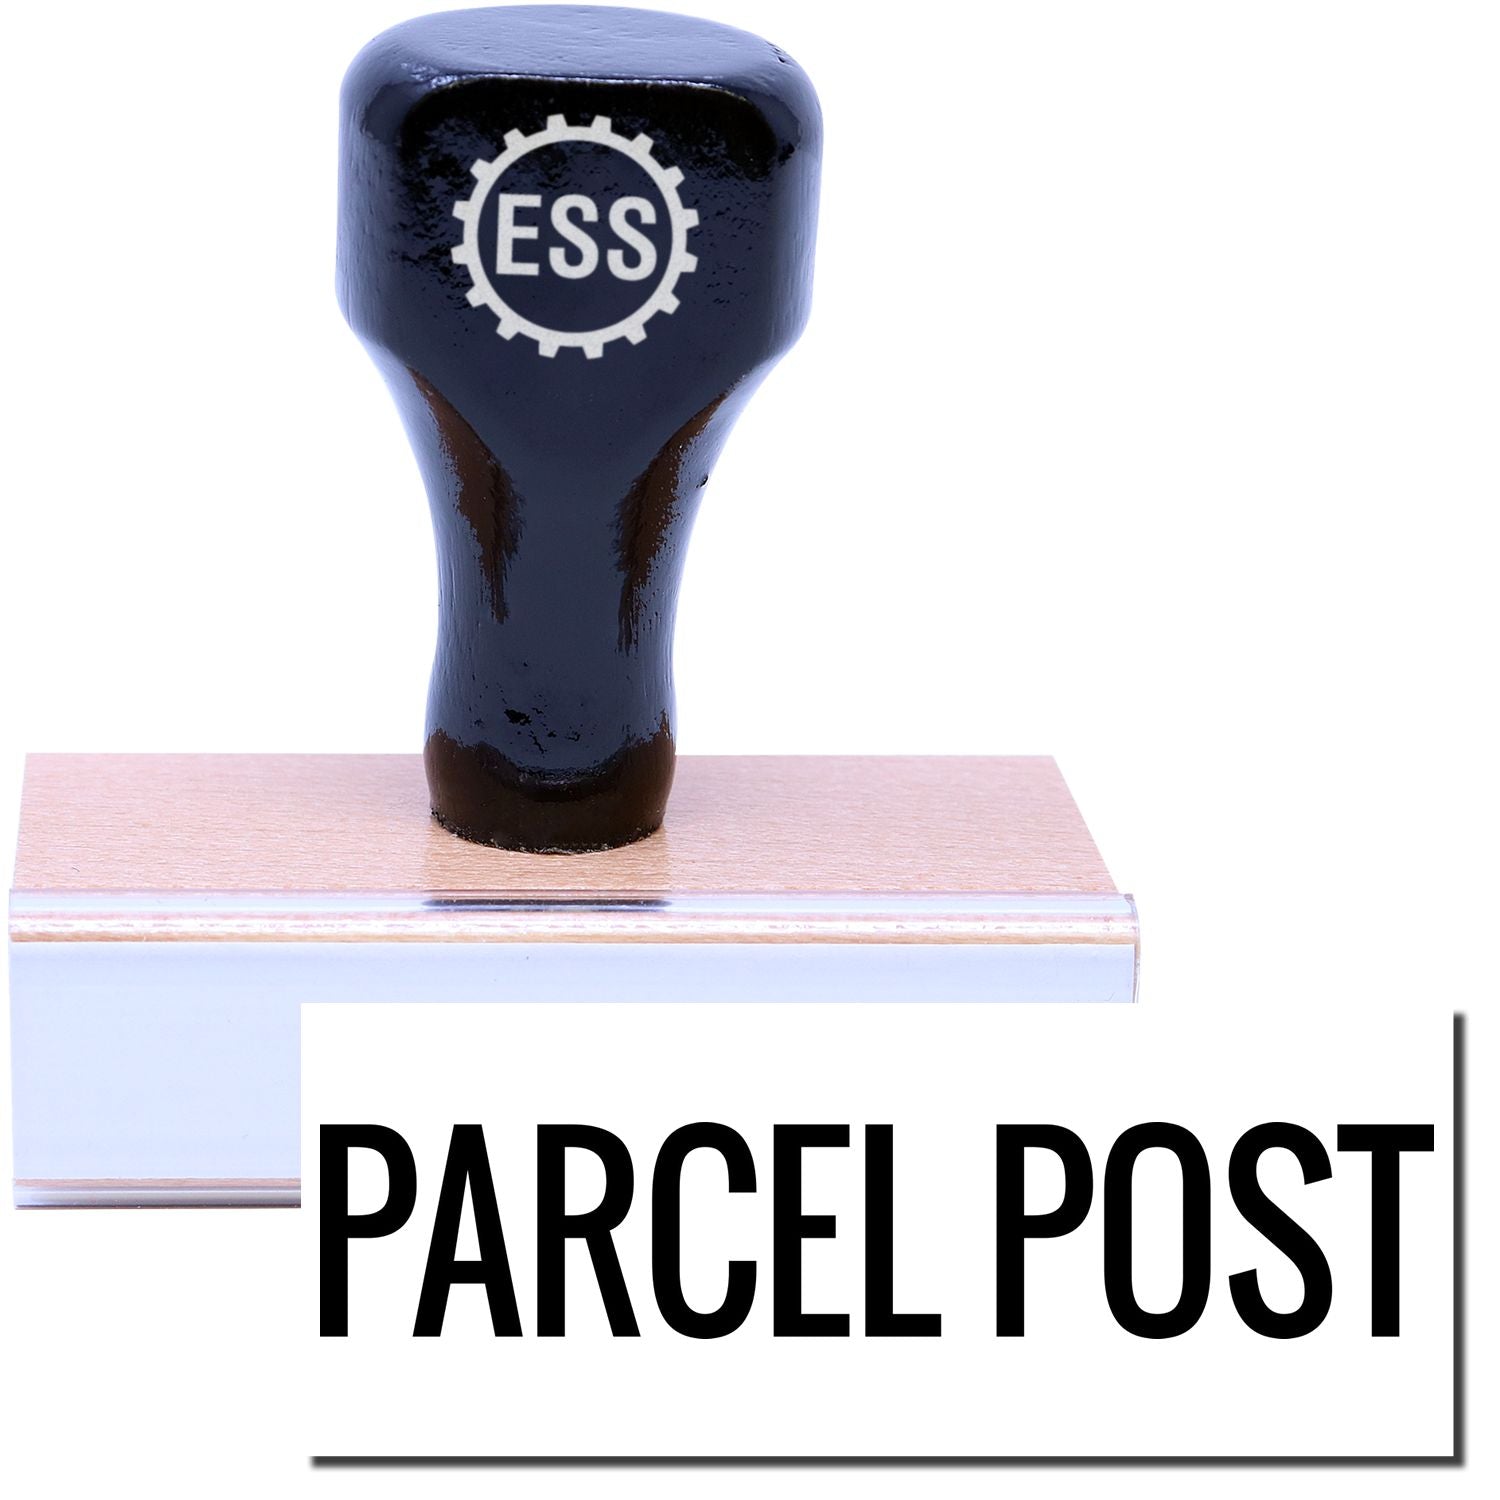 A stock office rubber stamp with a stamped image showing how the text "PARCEL POST" in a large font is displayed after stamping.